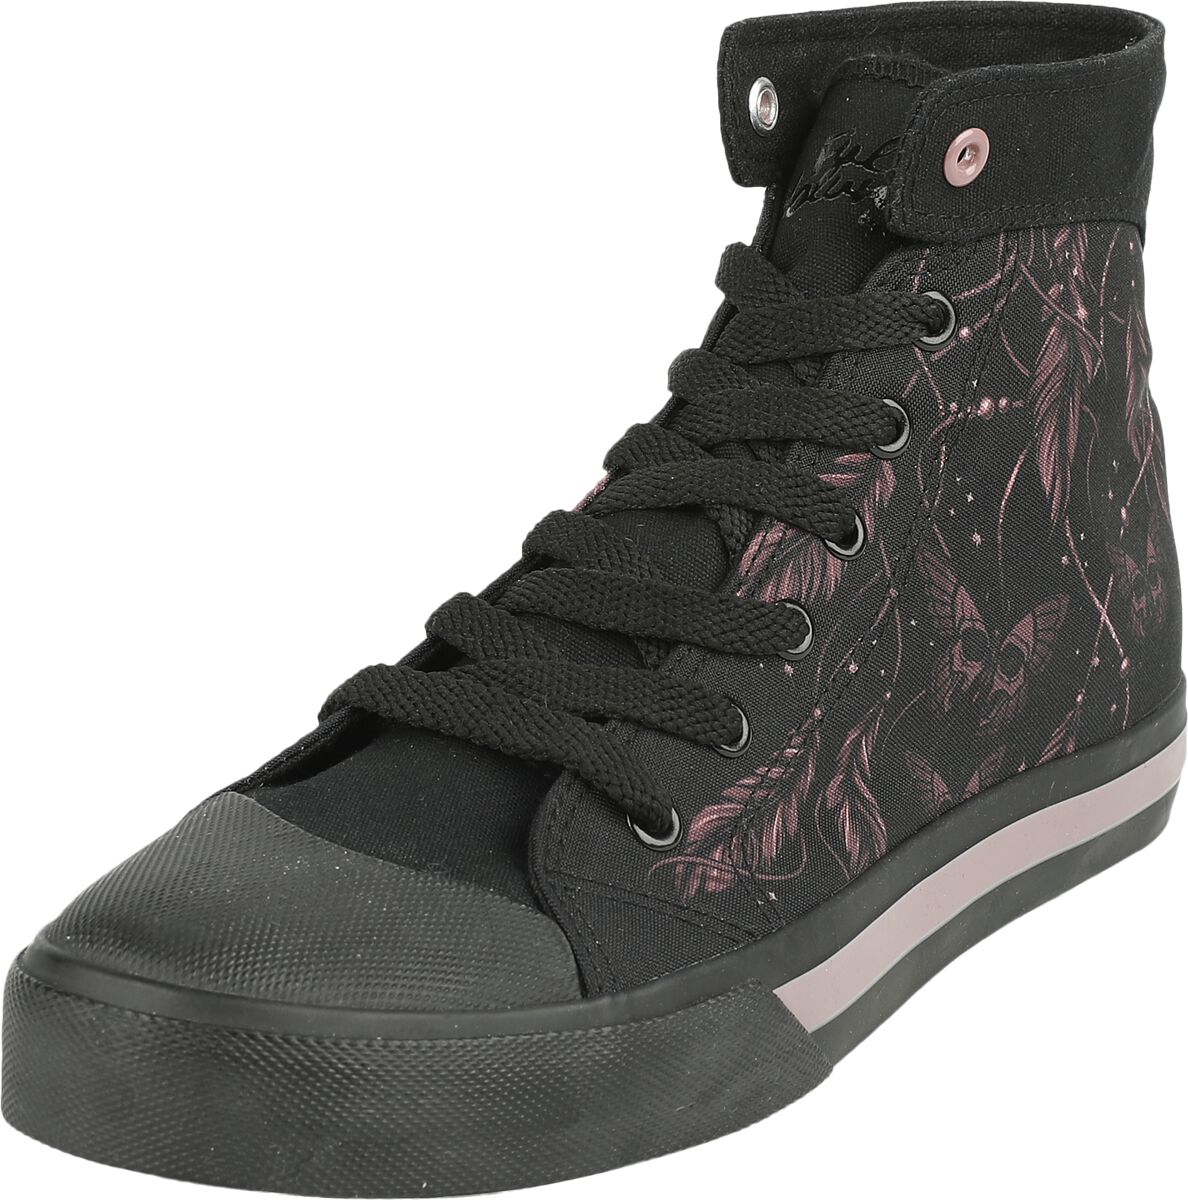 Image of Sneakers alte di Full Volume by EMP - Sneaker with Feathers and Butterflies - EU37 a EU41 - Donna - nero